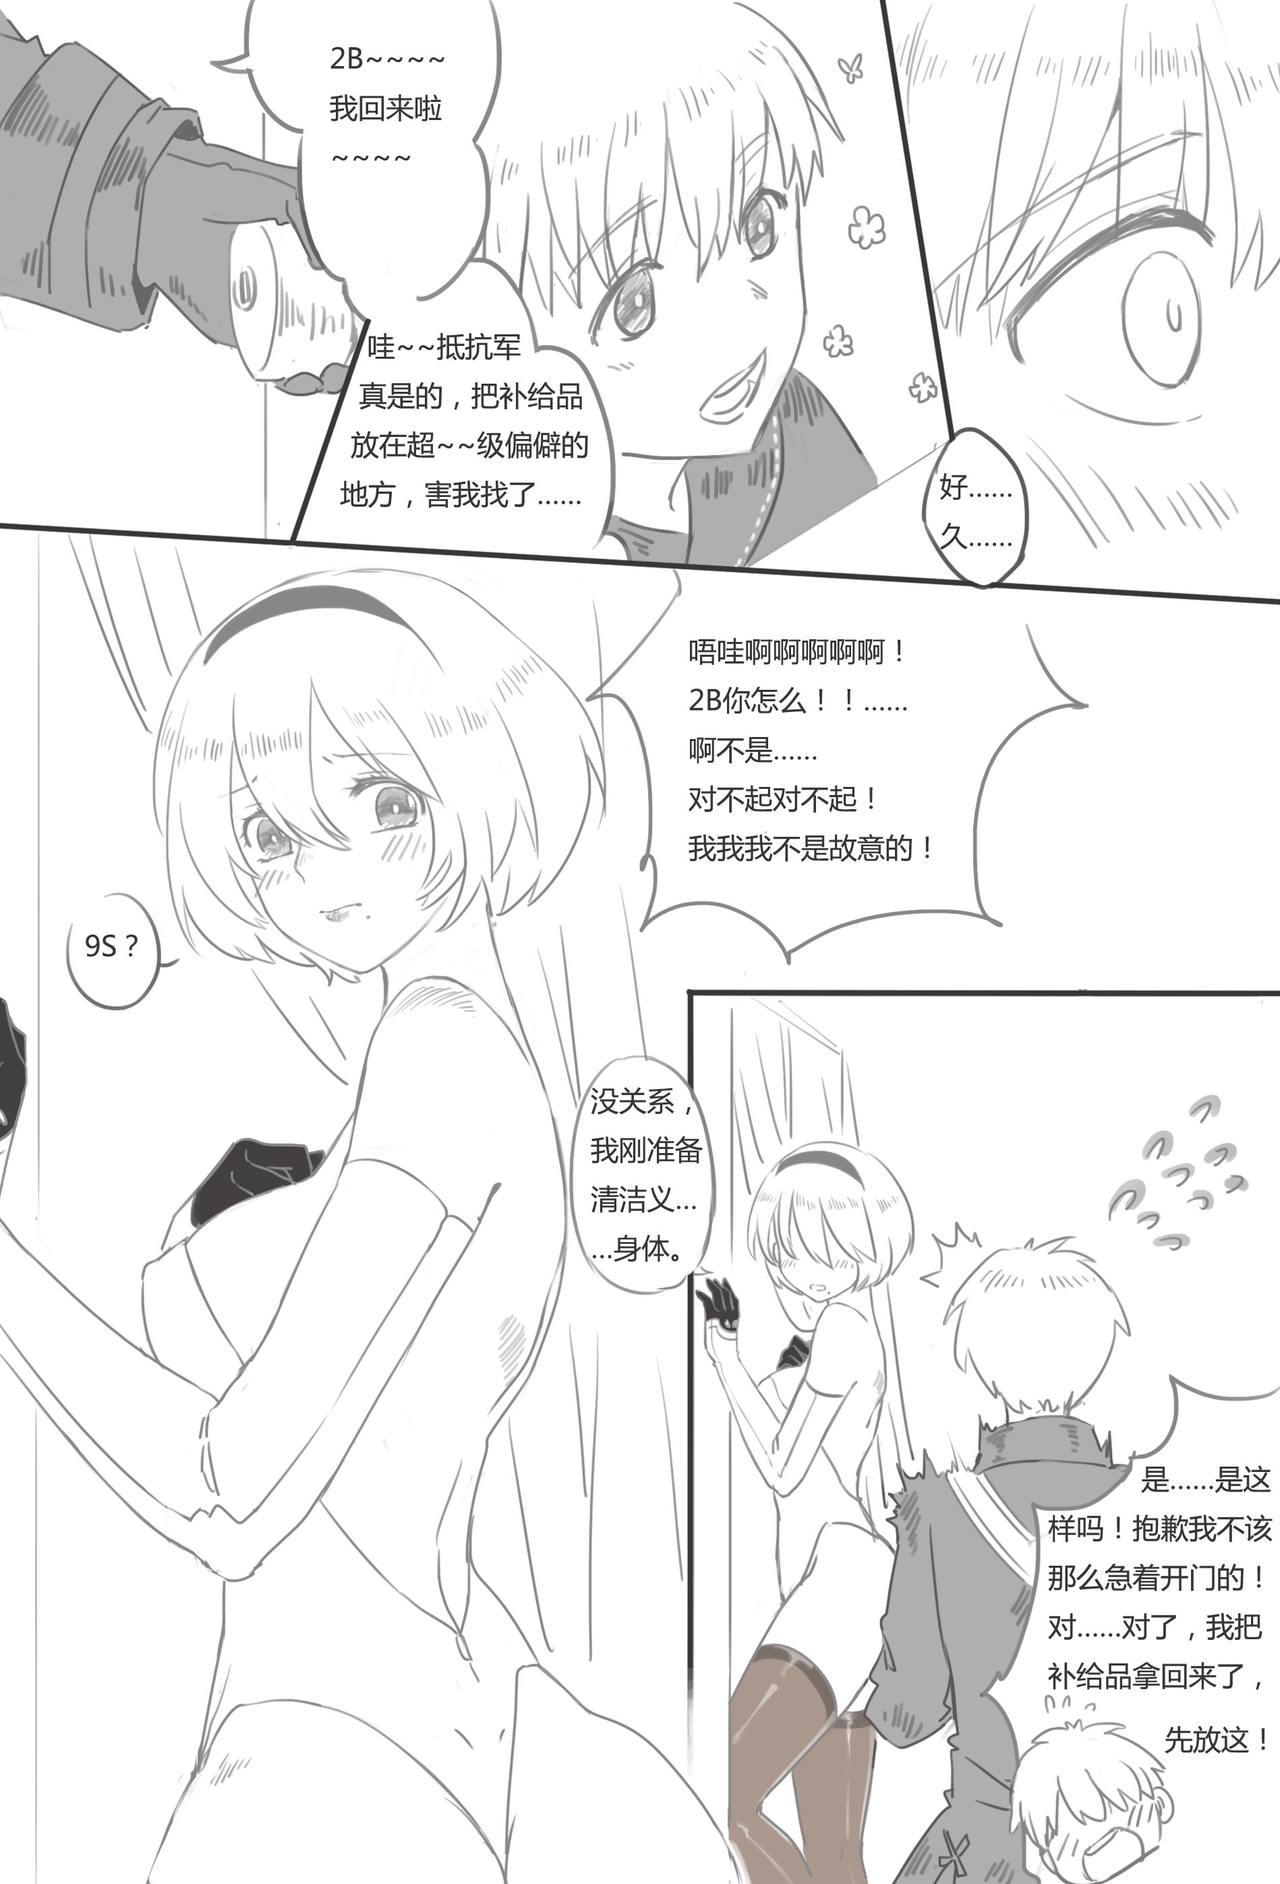 Bondagesex [WS] 9Sx2B - Life after the [E] end. (NieR:Automata) [Chinese] - Nier automata Argenta - Page 3